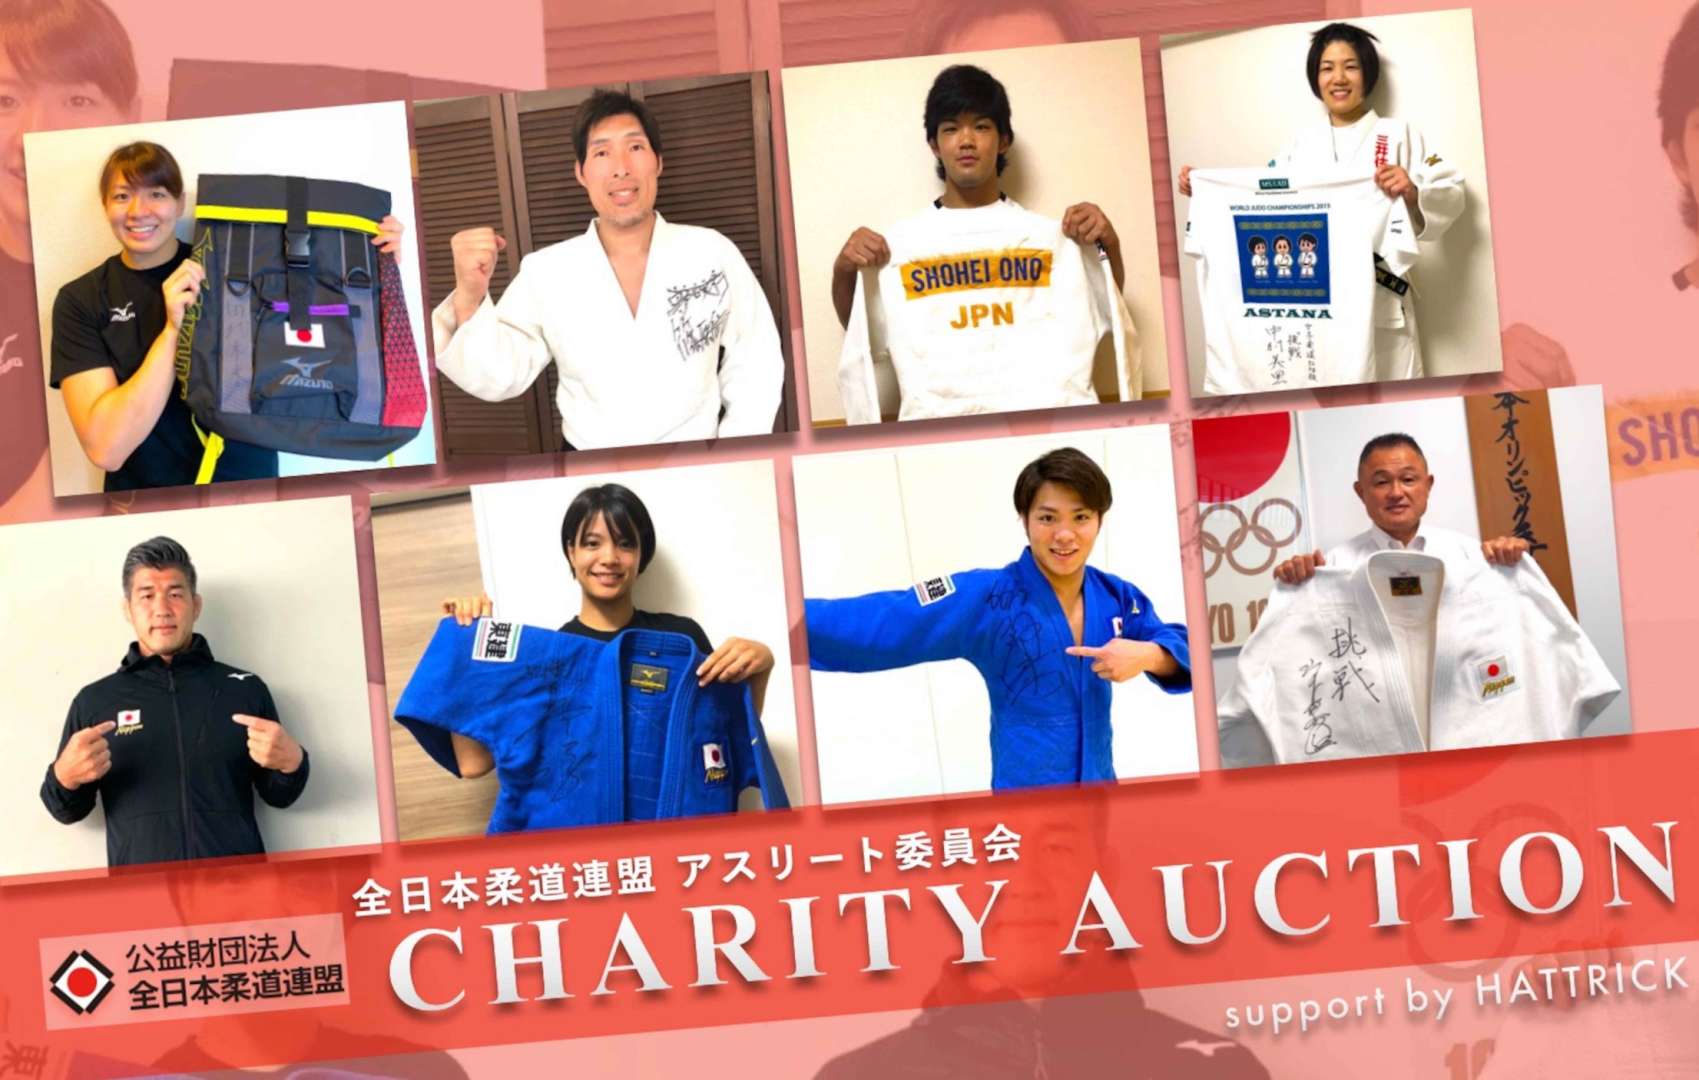 How to Have a Record-Breaking Charity Auction!